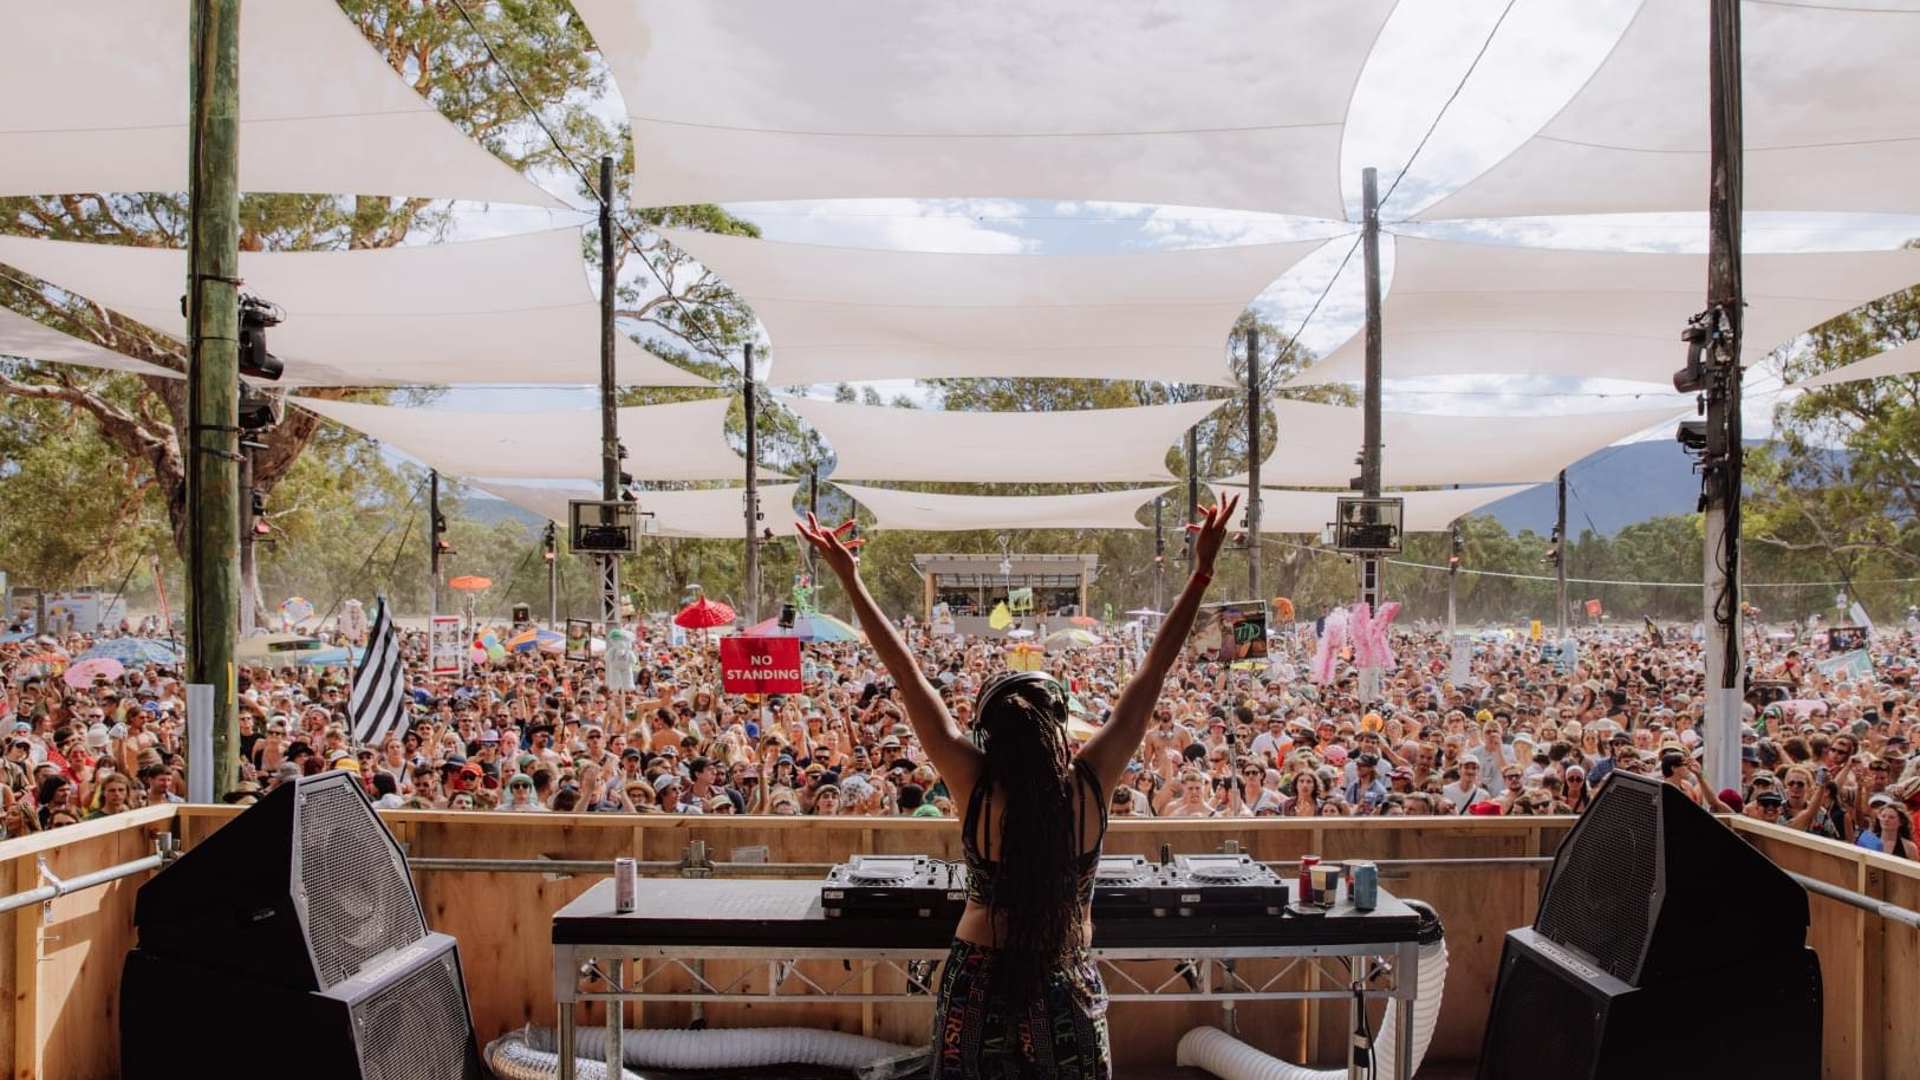 Helena Hauff, Four Tet and Nightmares on Wax Will Headline Pitch Music & Arts' 2023 Camping Fest